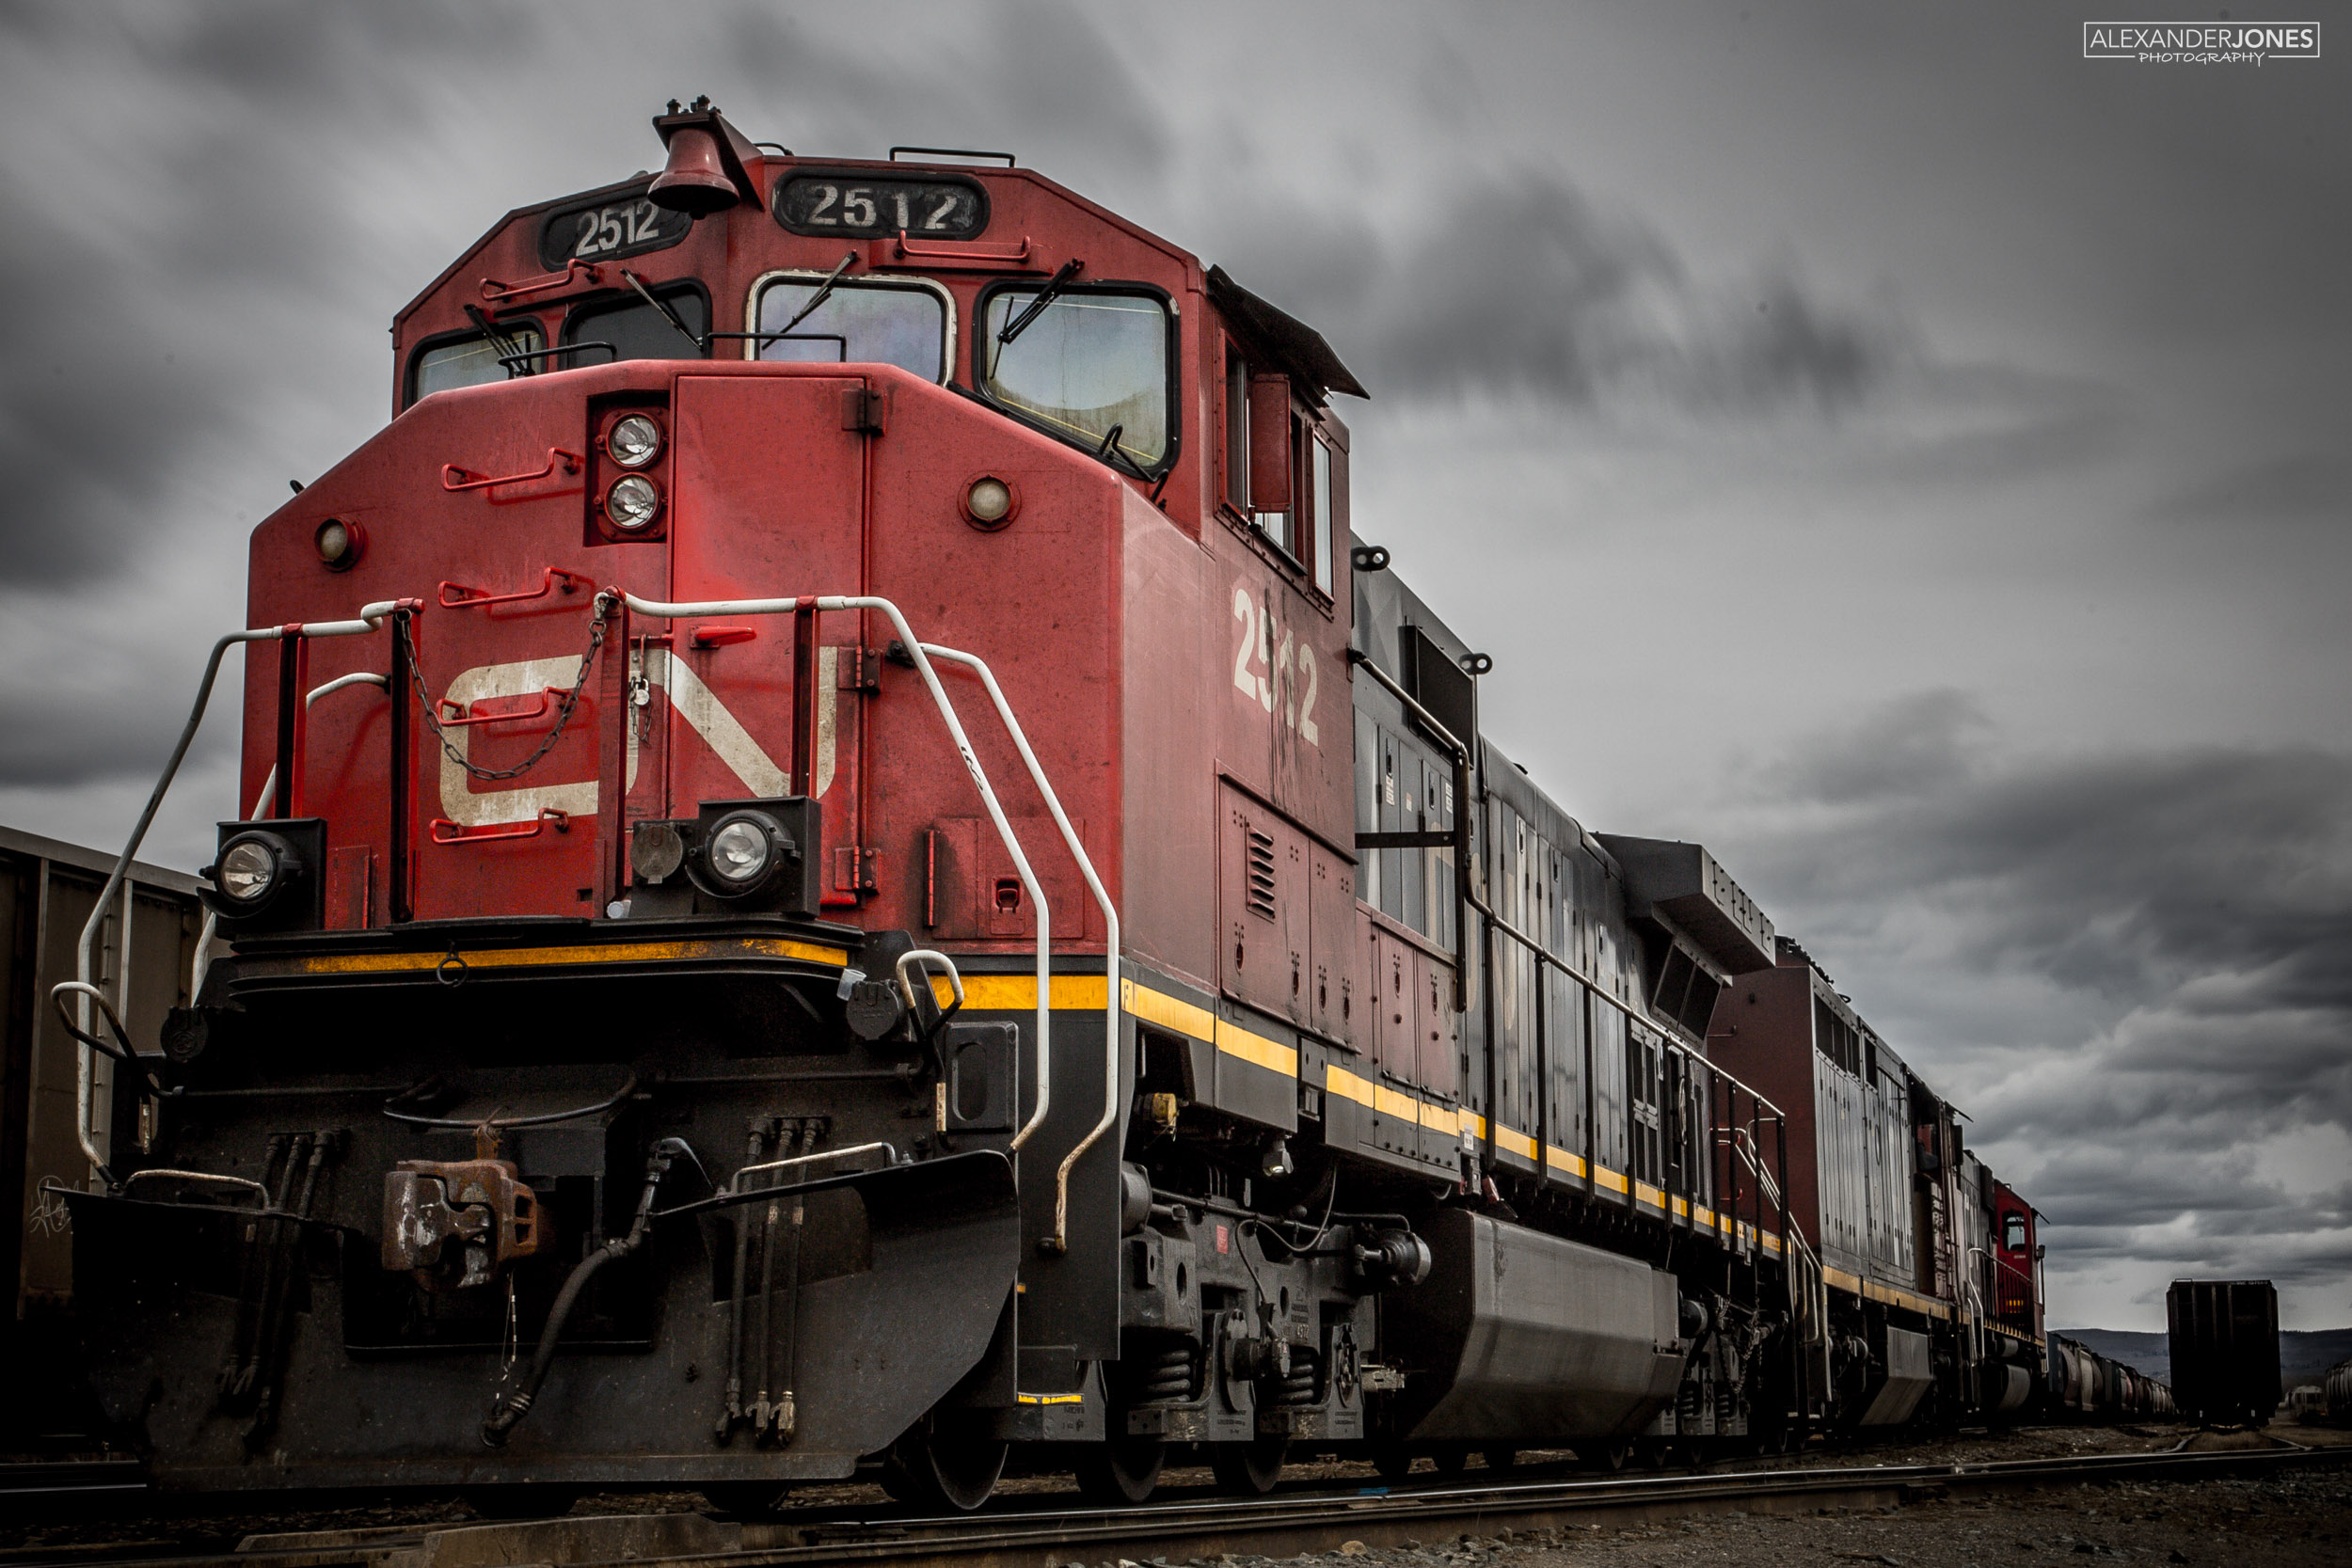 stationary CN freight train waiting to depart in British Columbia Canada